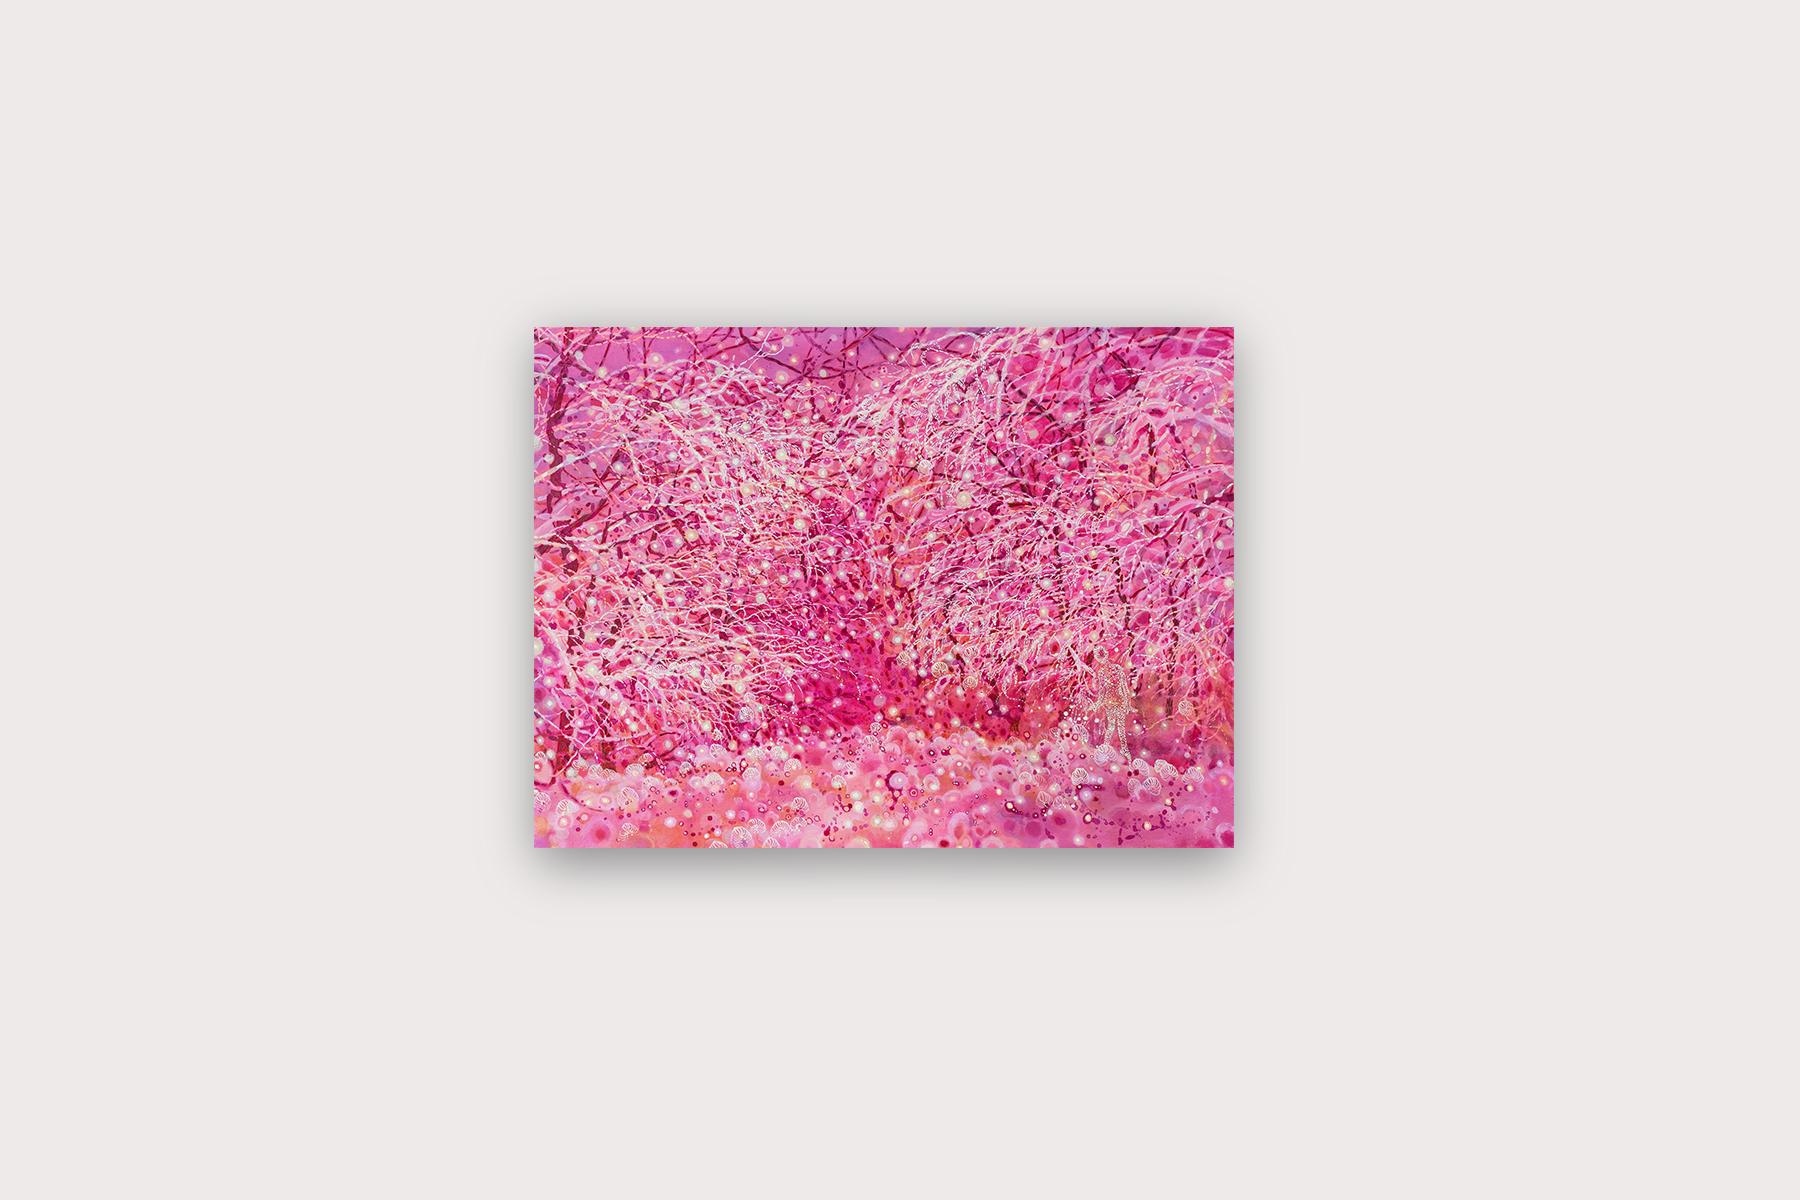 Mysterious & Romantic Nature Scenes Pink, White In Abstract Expression 1